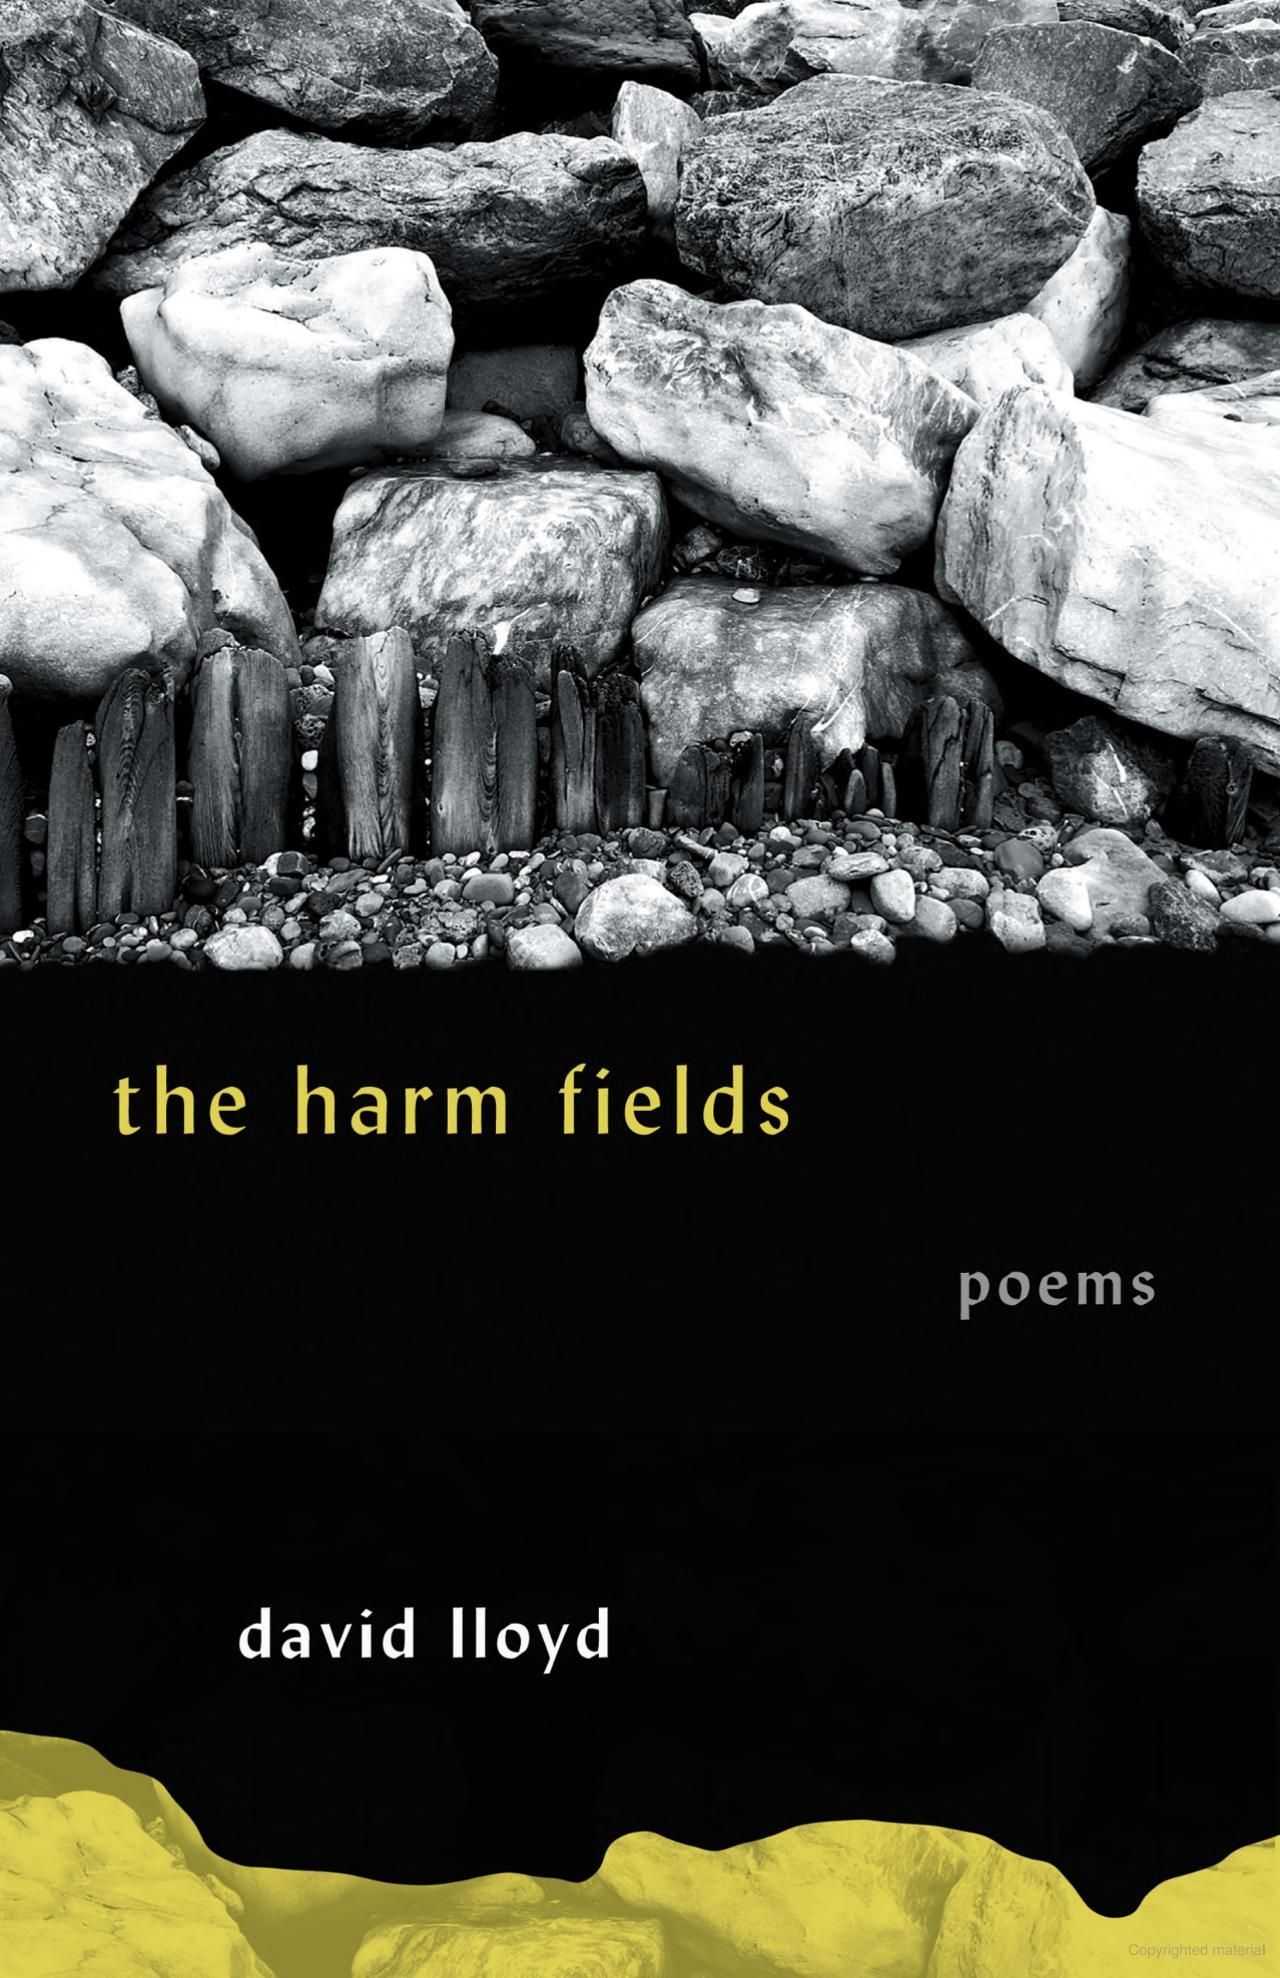 In / Divisible Ink: On David Lloyd’s “The Harm Fields”